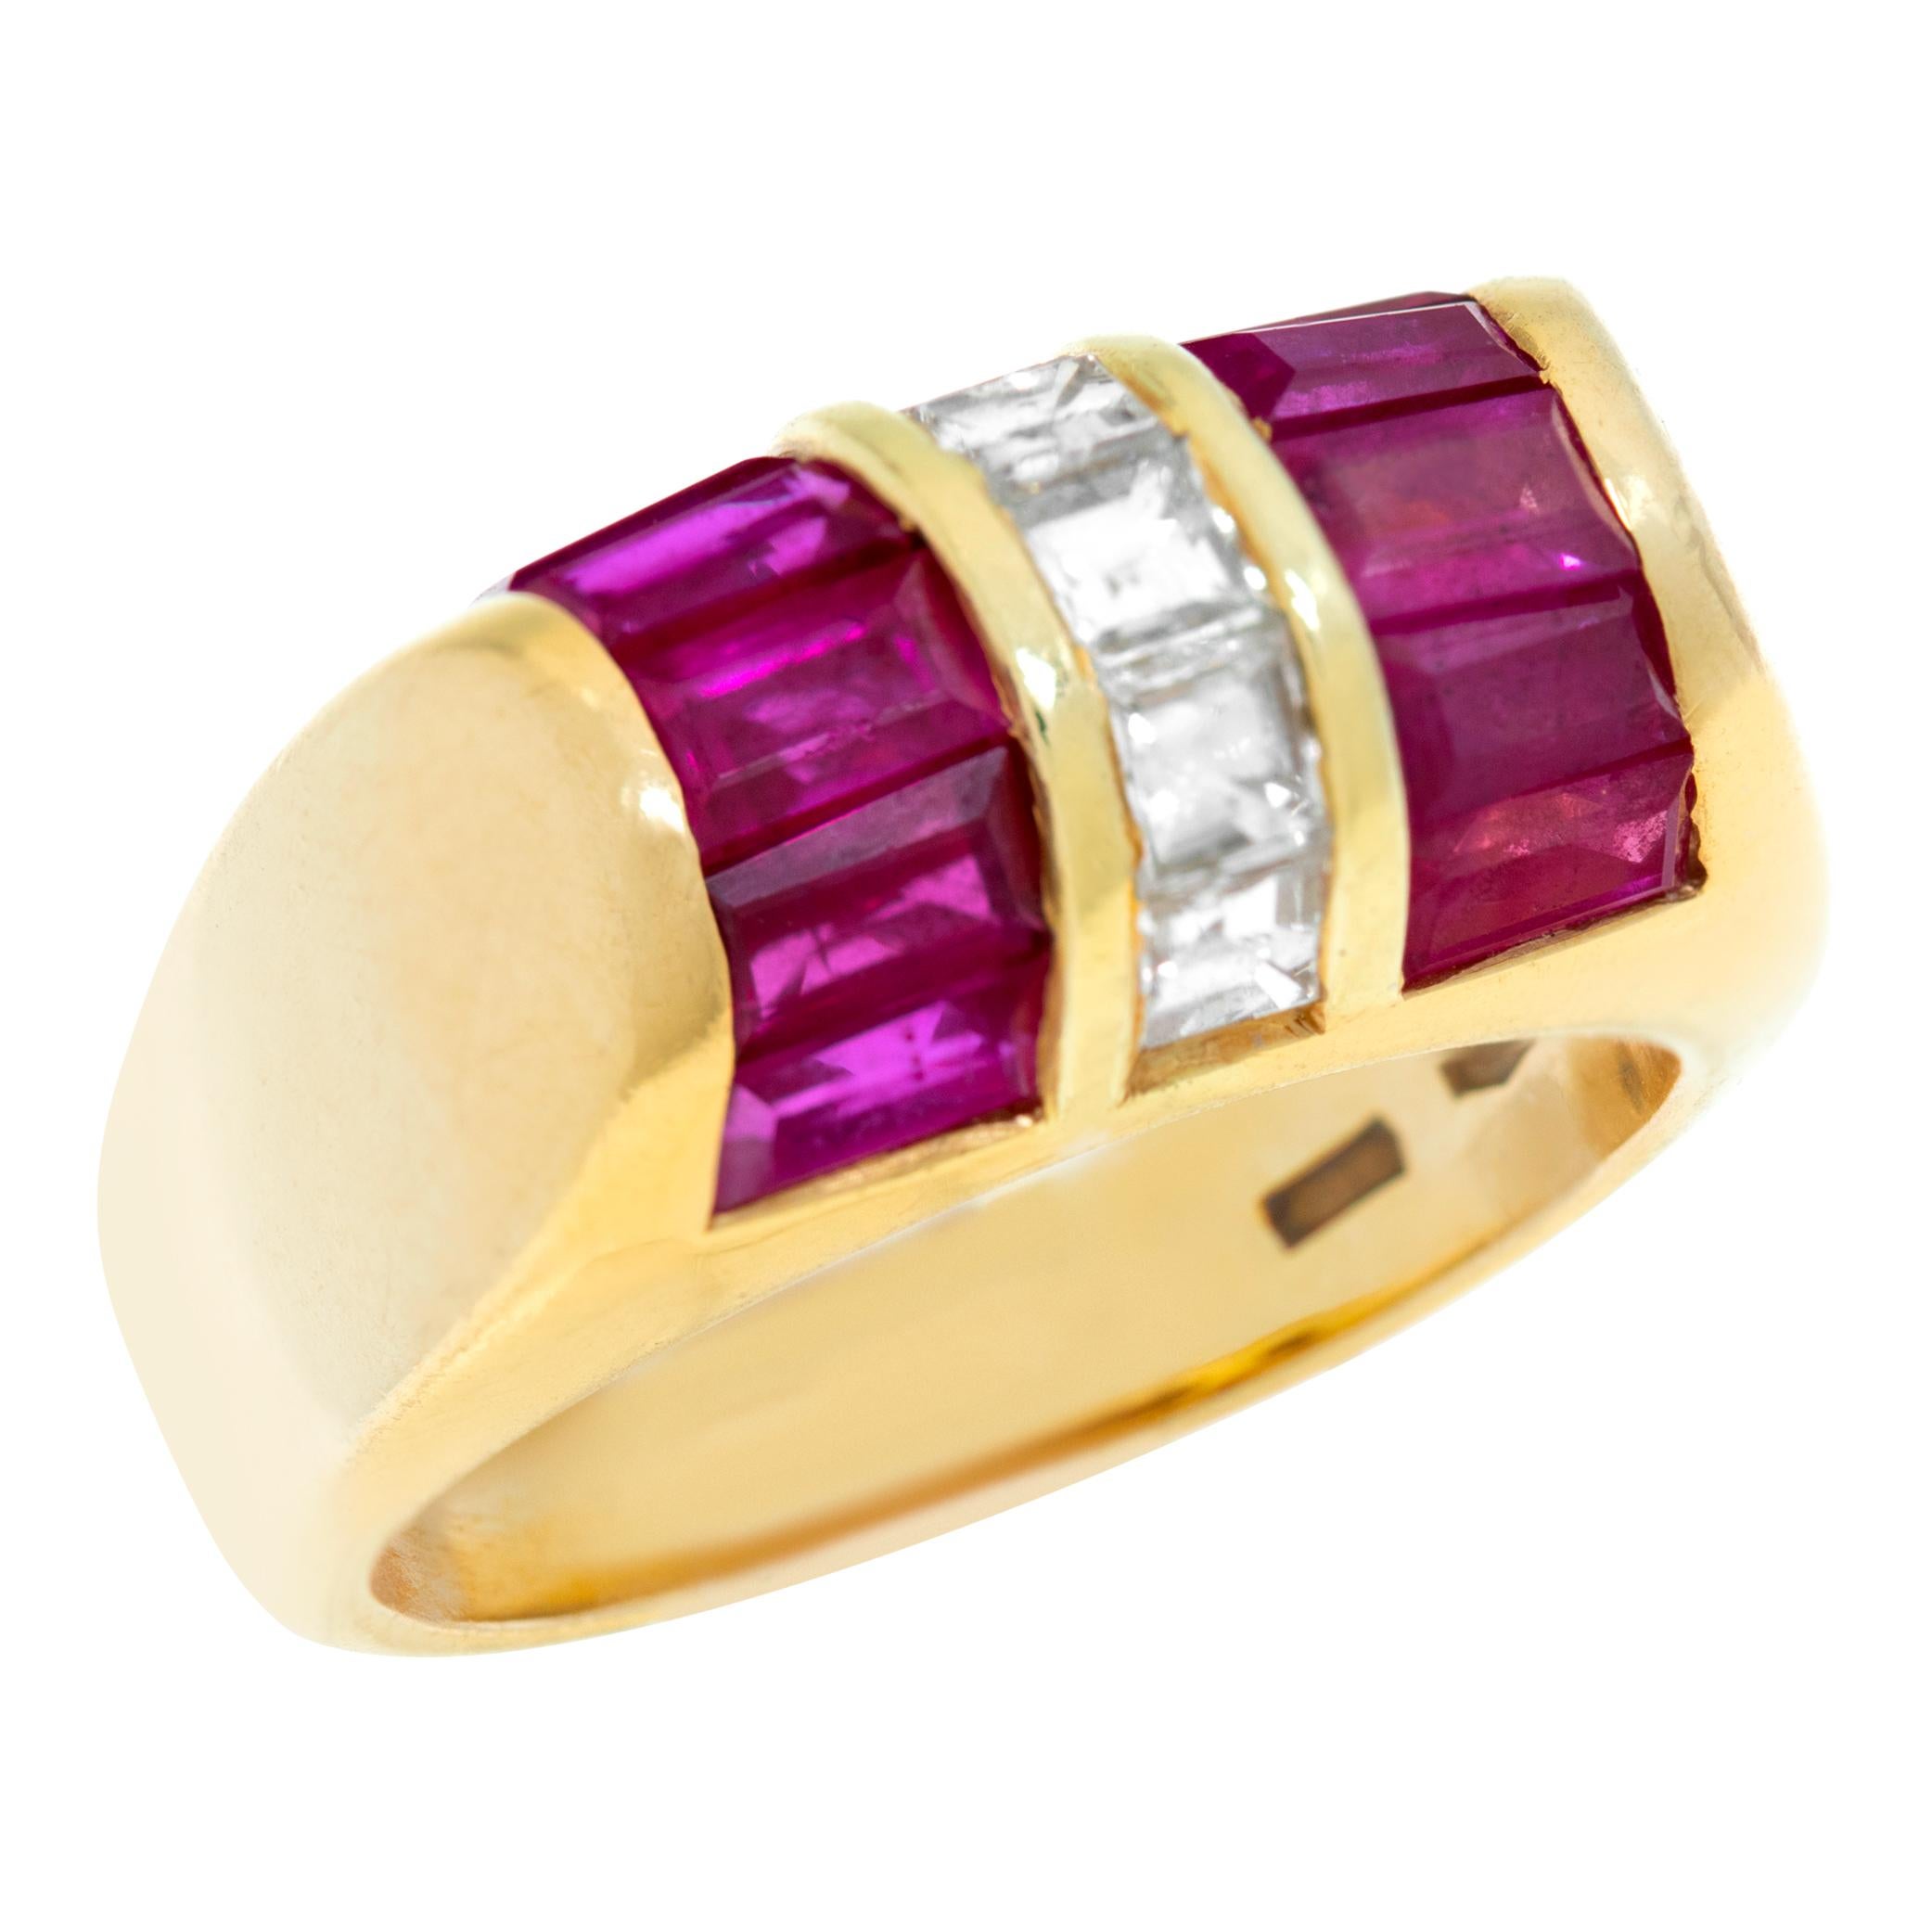 Bvlgari vintage emerald cut diamonds & baguettes rubies ring in yellow gold. In Excellent Condition For Sale In Surfside, FL